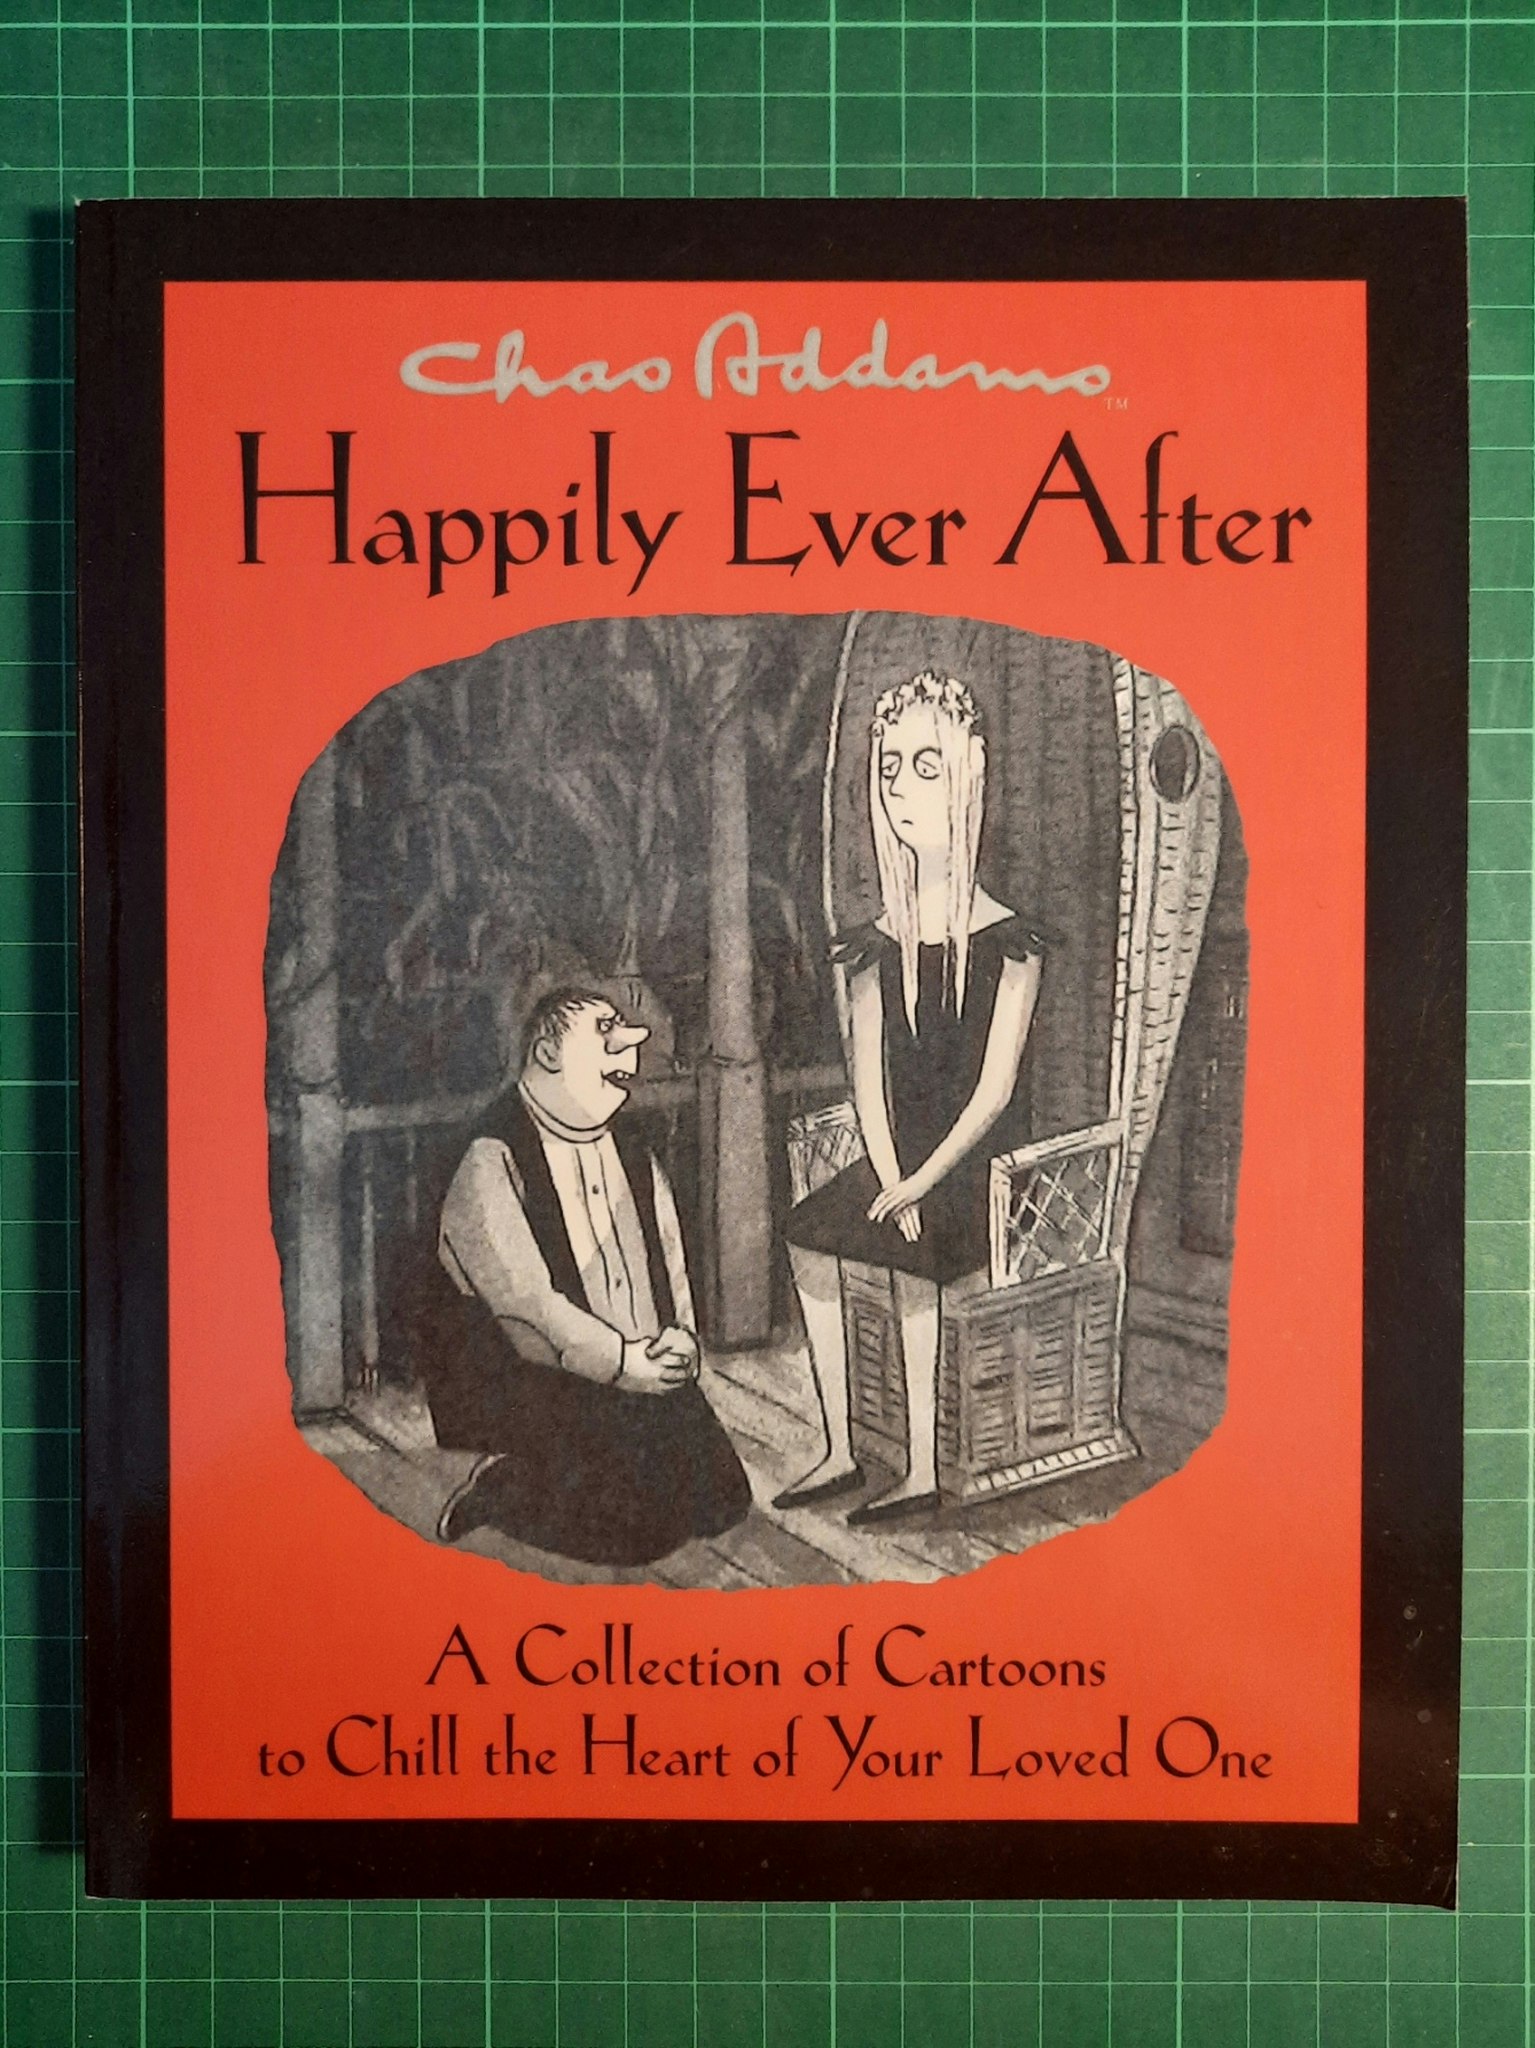 Chas Addams : Happily ever after